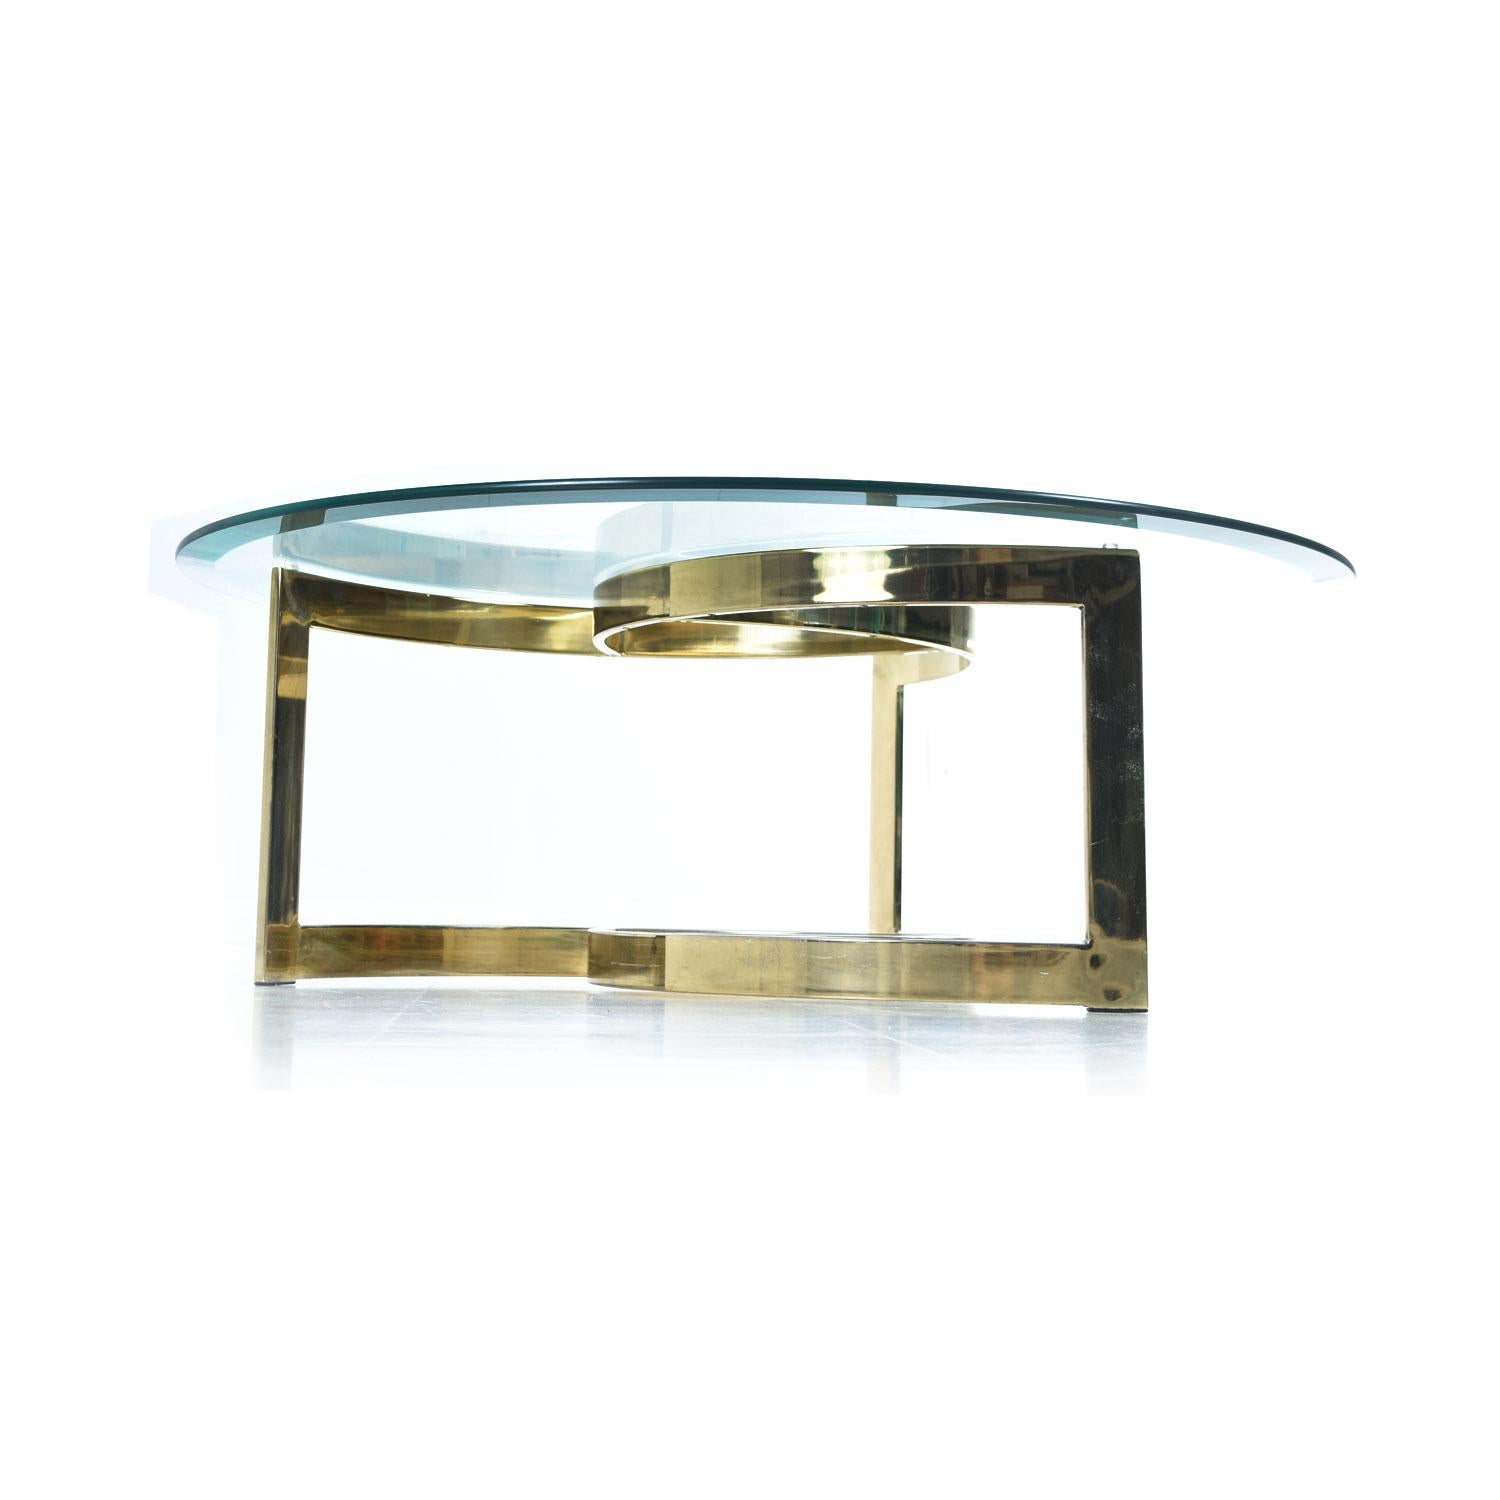 American Hollywood Regency Gold Spiral Coffee Table with Circular Glass Top on Brass Base